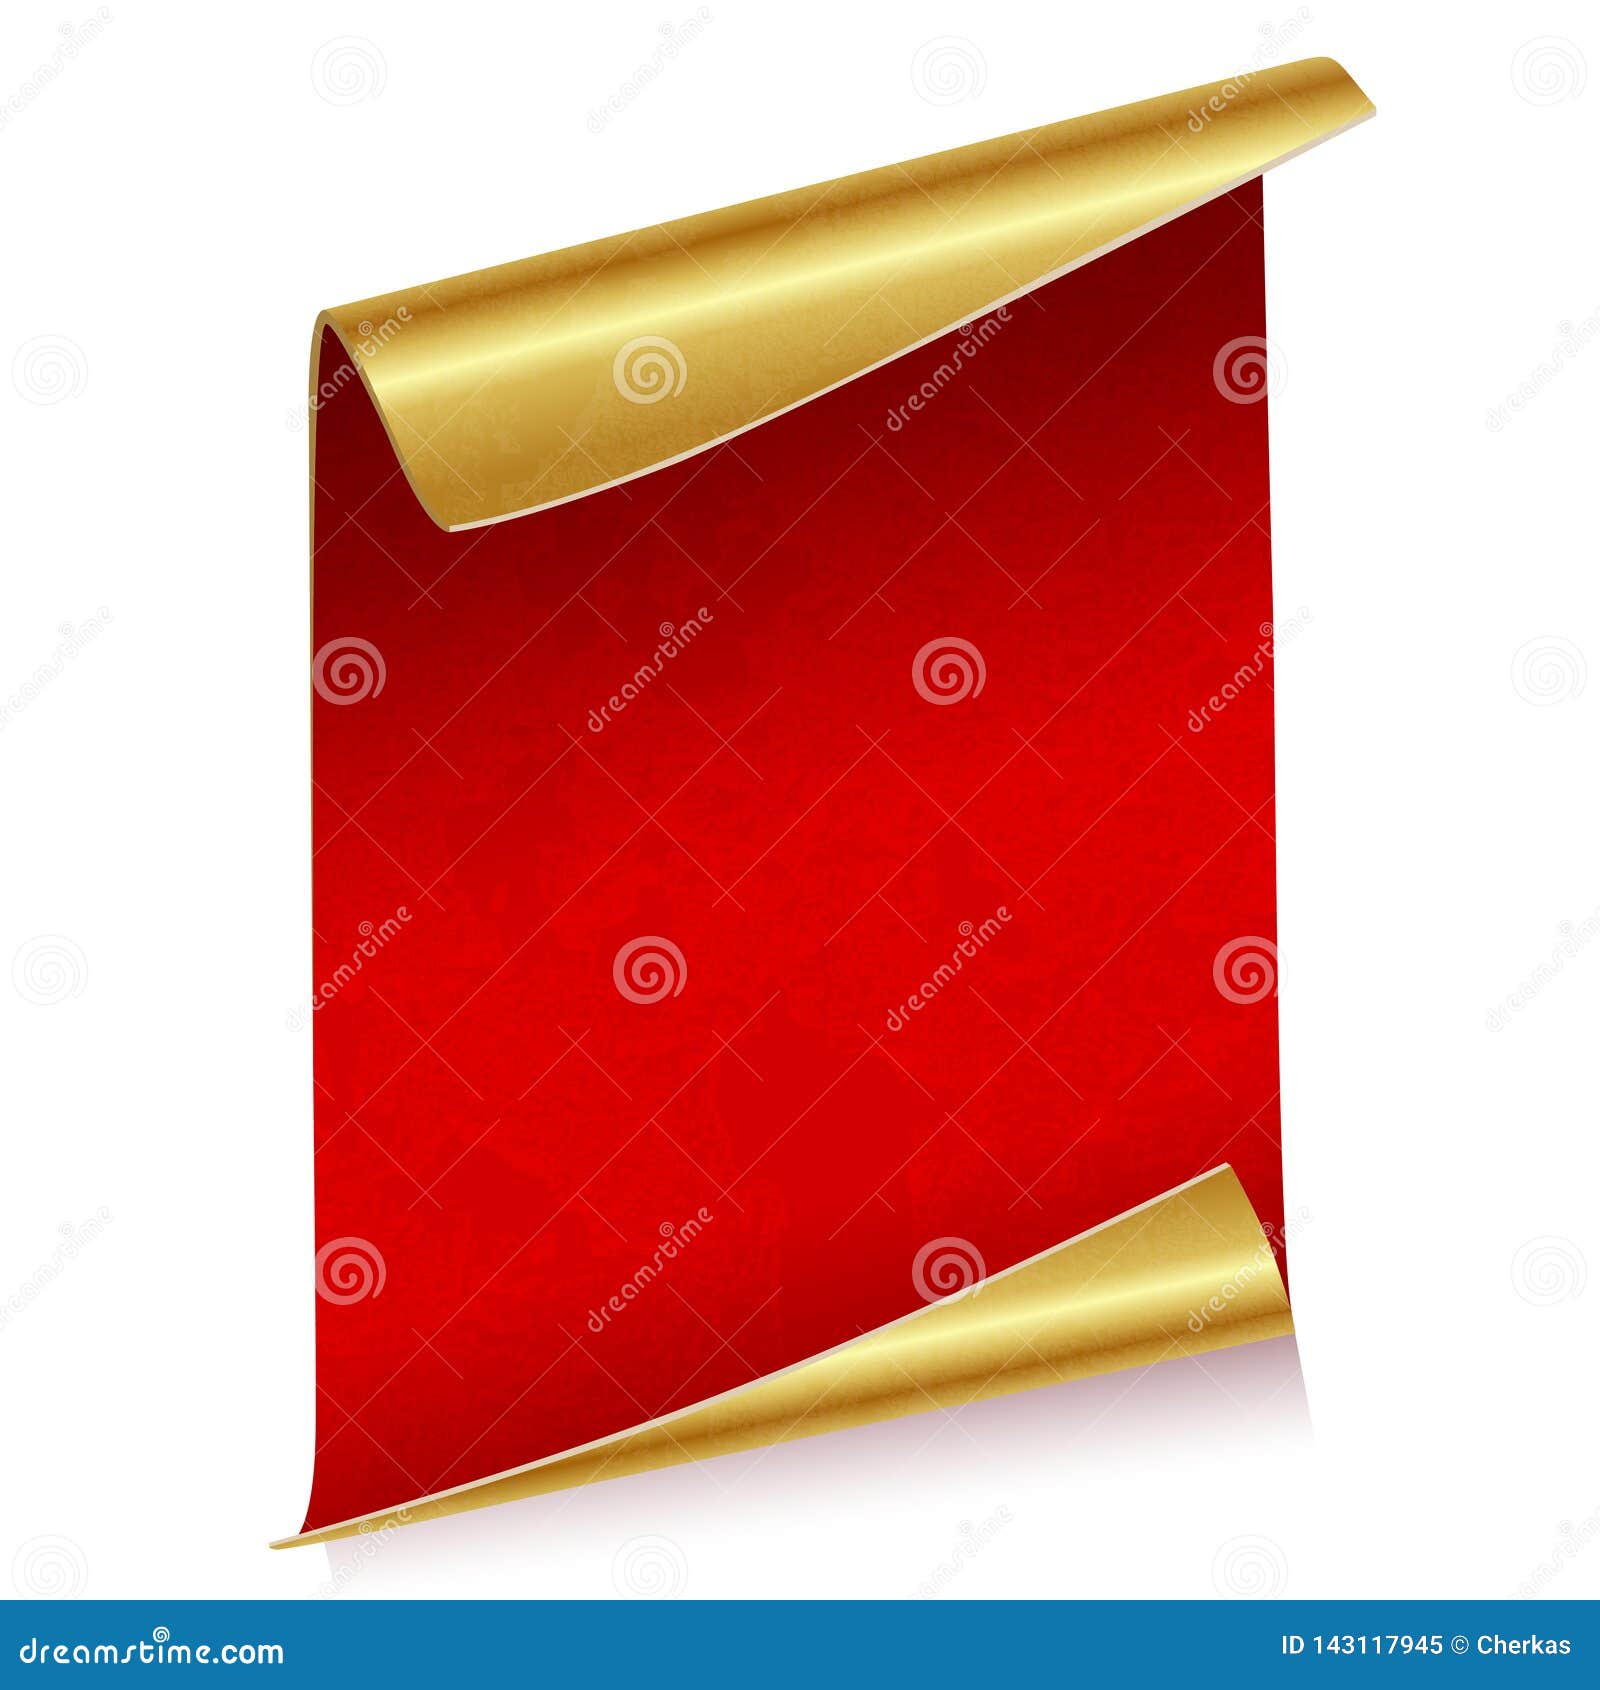 https://thumbs.dreamstime.com/z/sheet-red-parchment-paper-golden-edges-writing-gift-advertising-christmas-birthday-white-background-143117945.jpg